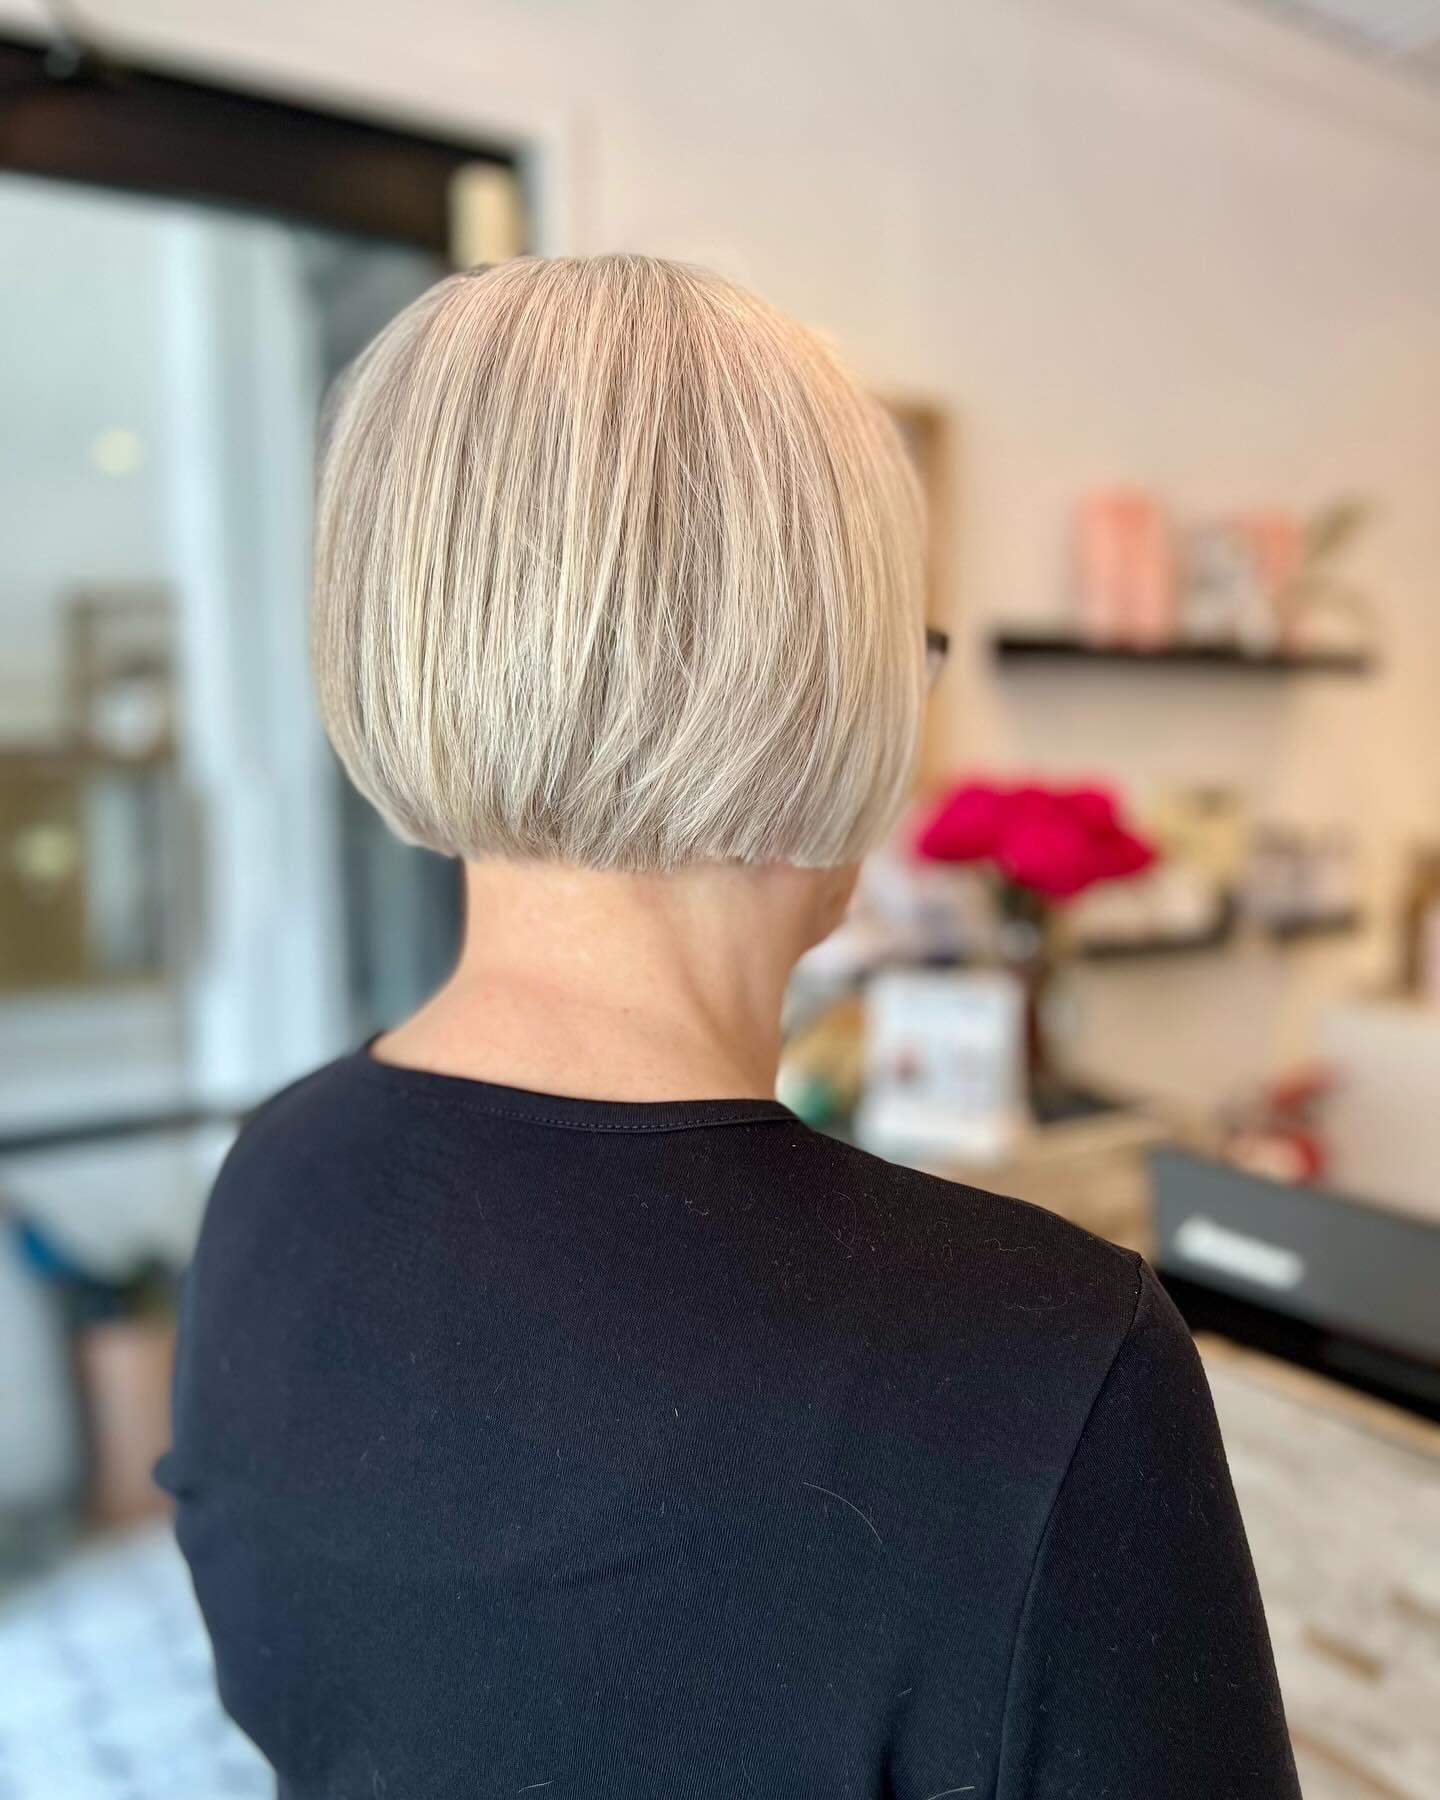 This precision bob by Rose couldn&rsquo;t be more perfect! Rose is choosing Teddy Swims as the music station #thisweekatmirrorandmantel 

#precisioncutting #shorthair #chinlengthbob #rosemirrorandmantel #teddyswims #musicpickoftheweek